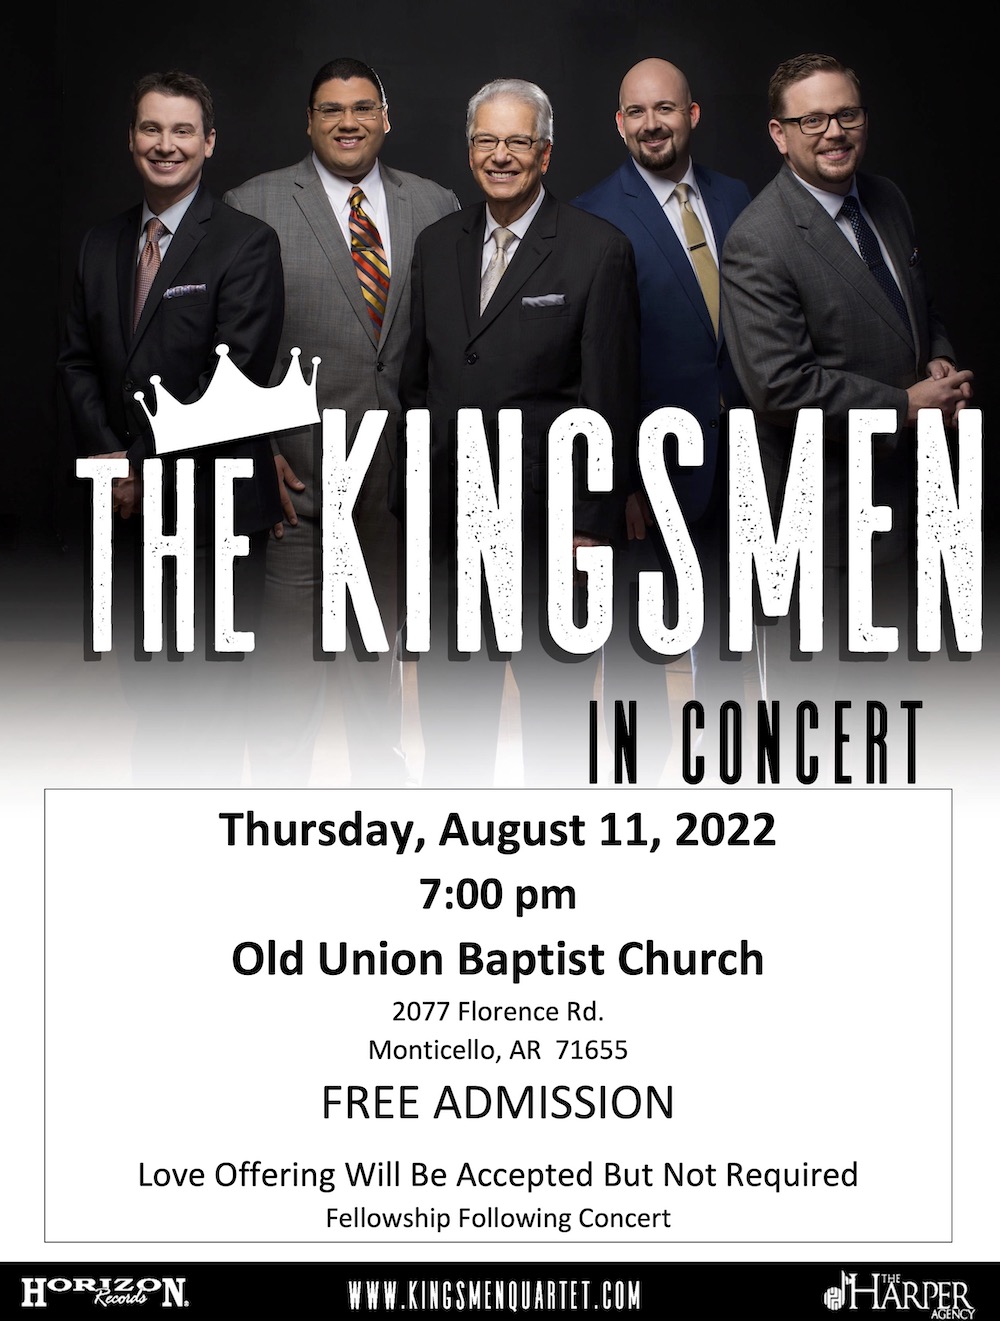 The Kingsmen to be in concert at Old Union Baptist Church August 11